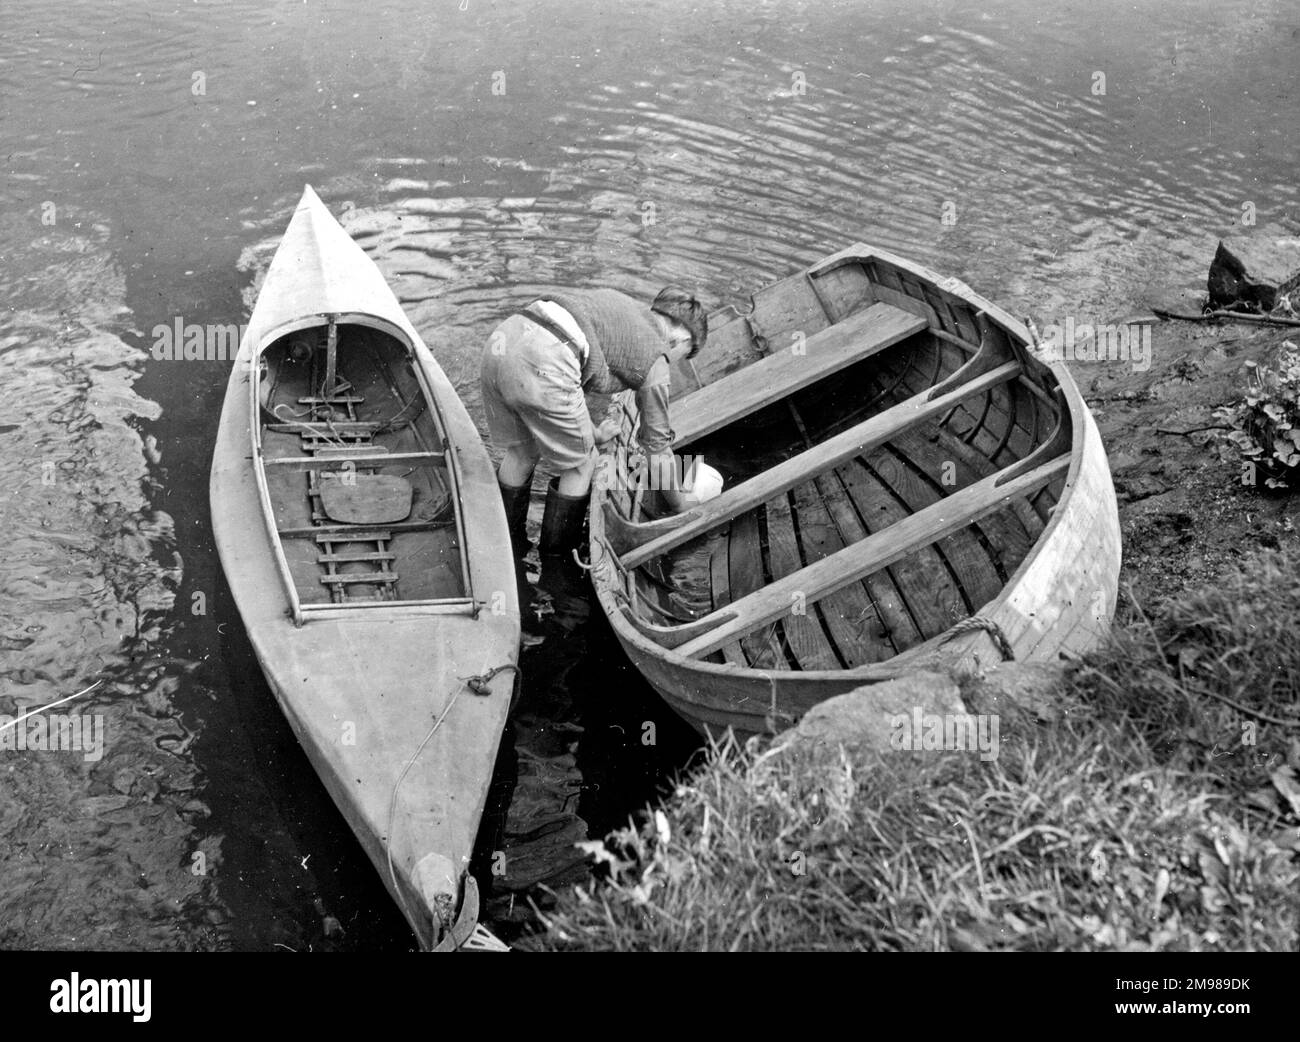 Boy bailing out water from a rowing boat, with a canoe alongside. Stock Photo